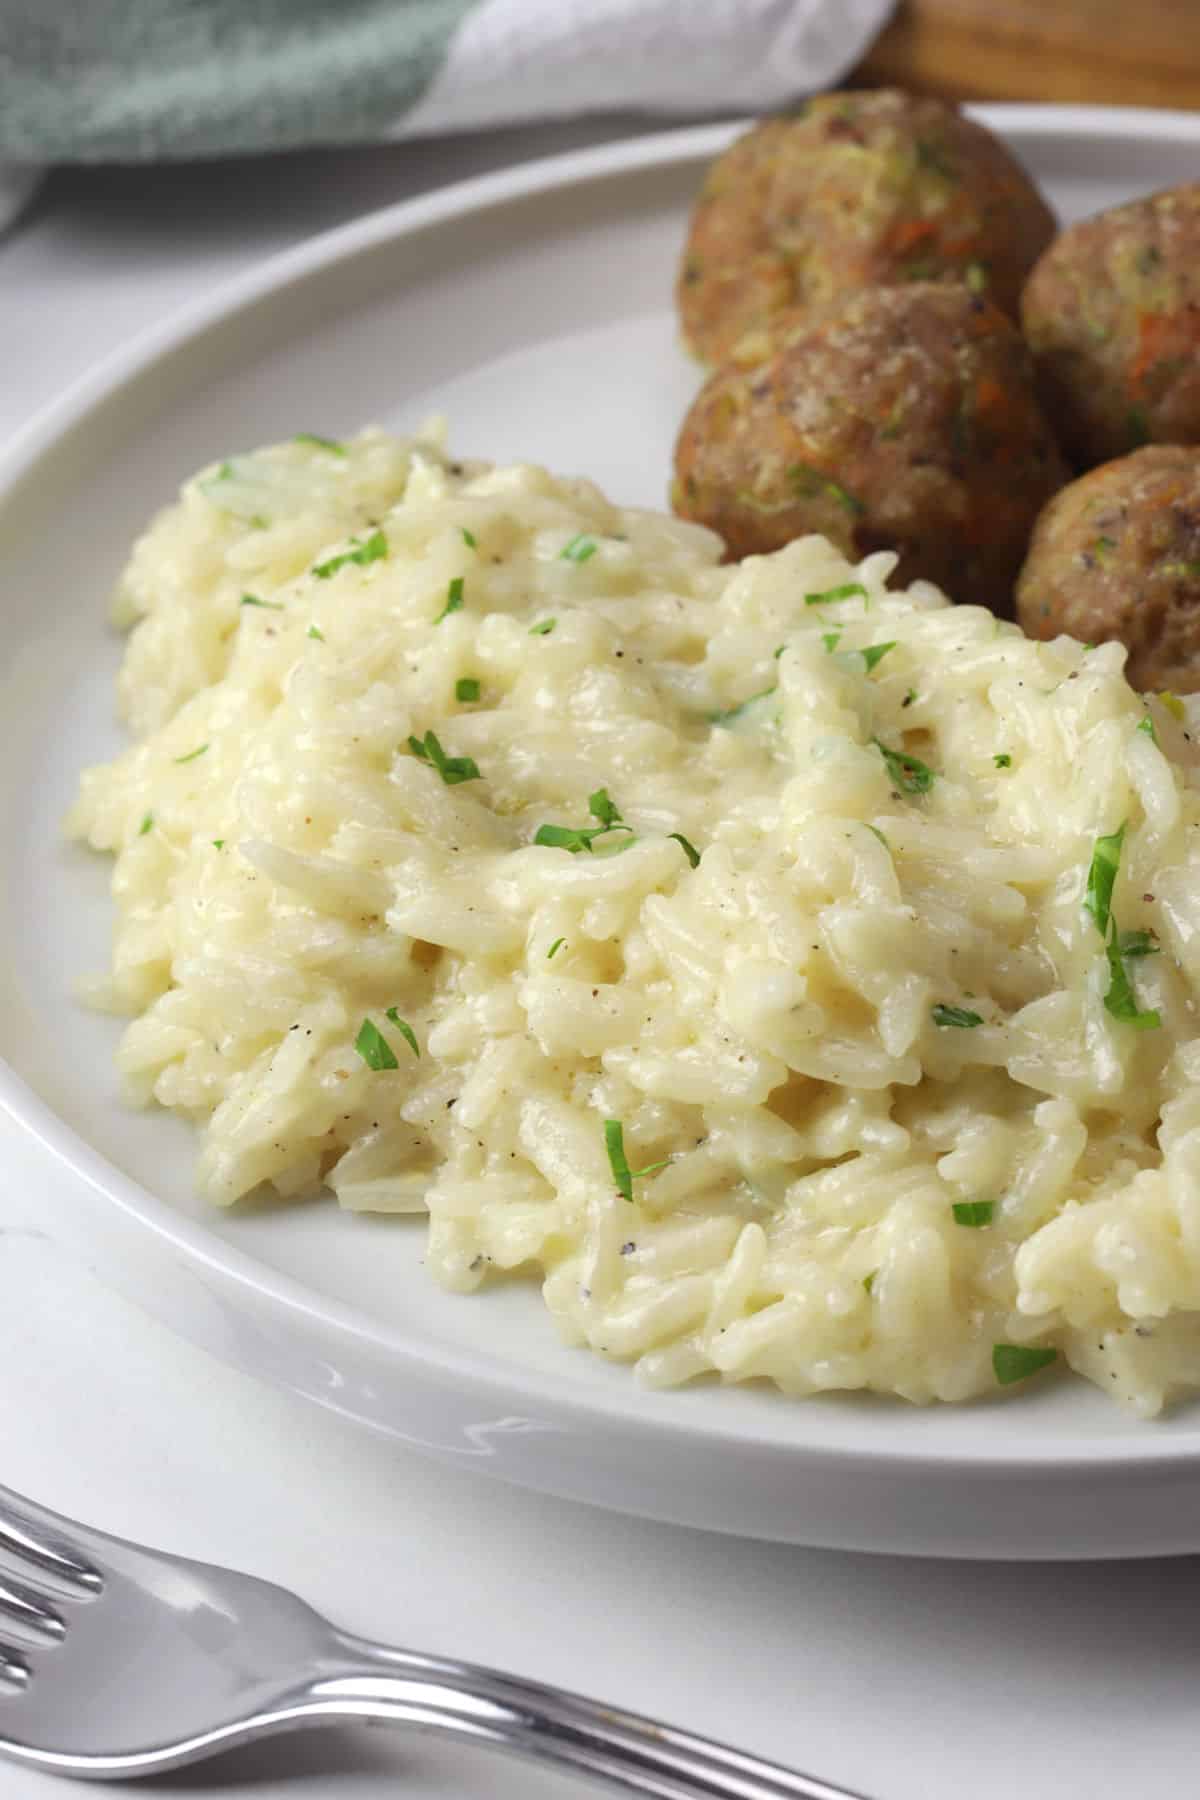 Garlic parmesan rice plated with meatballs on a white plate.